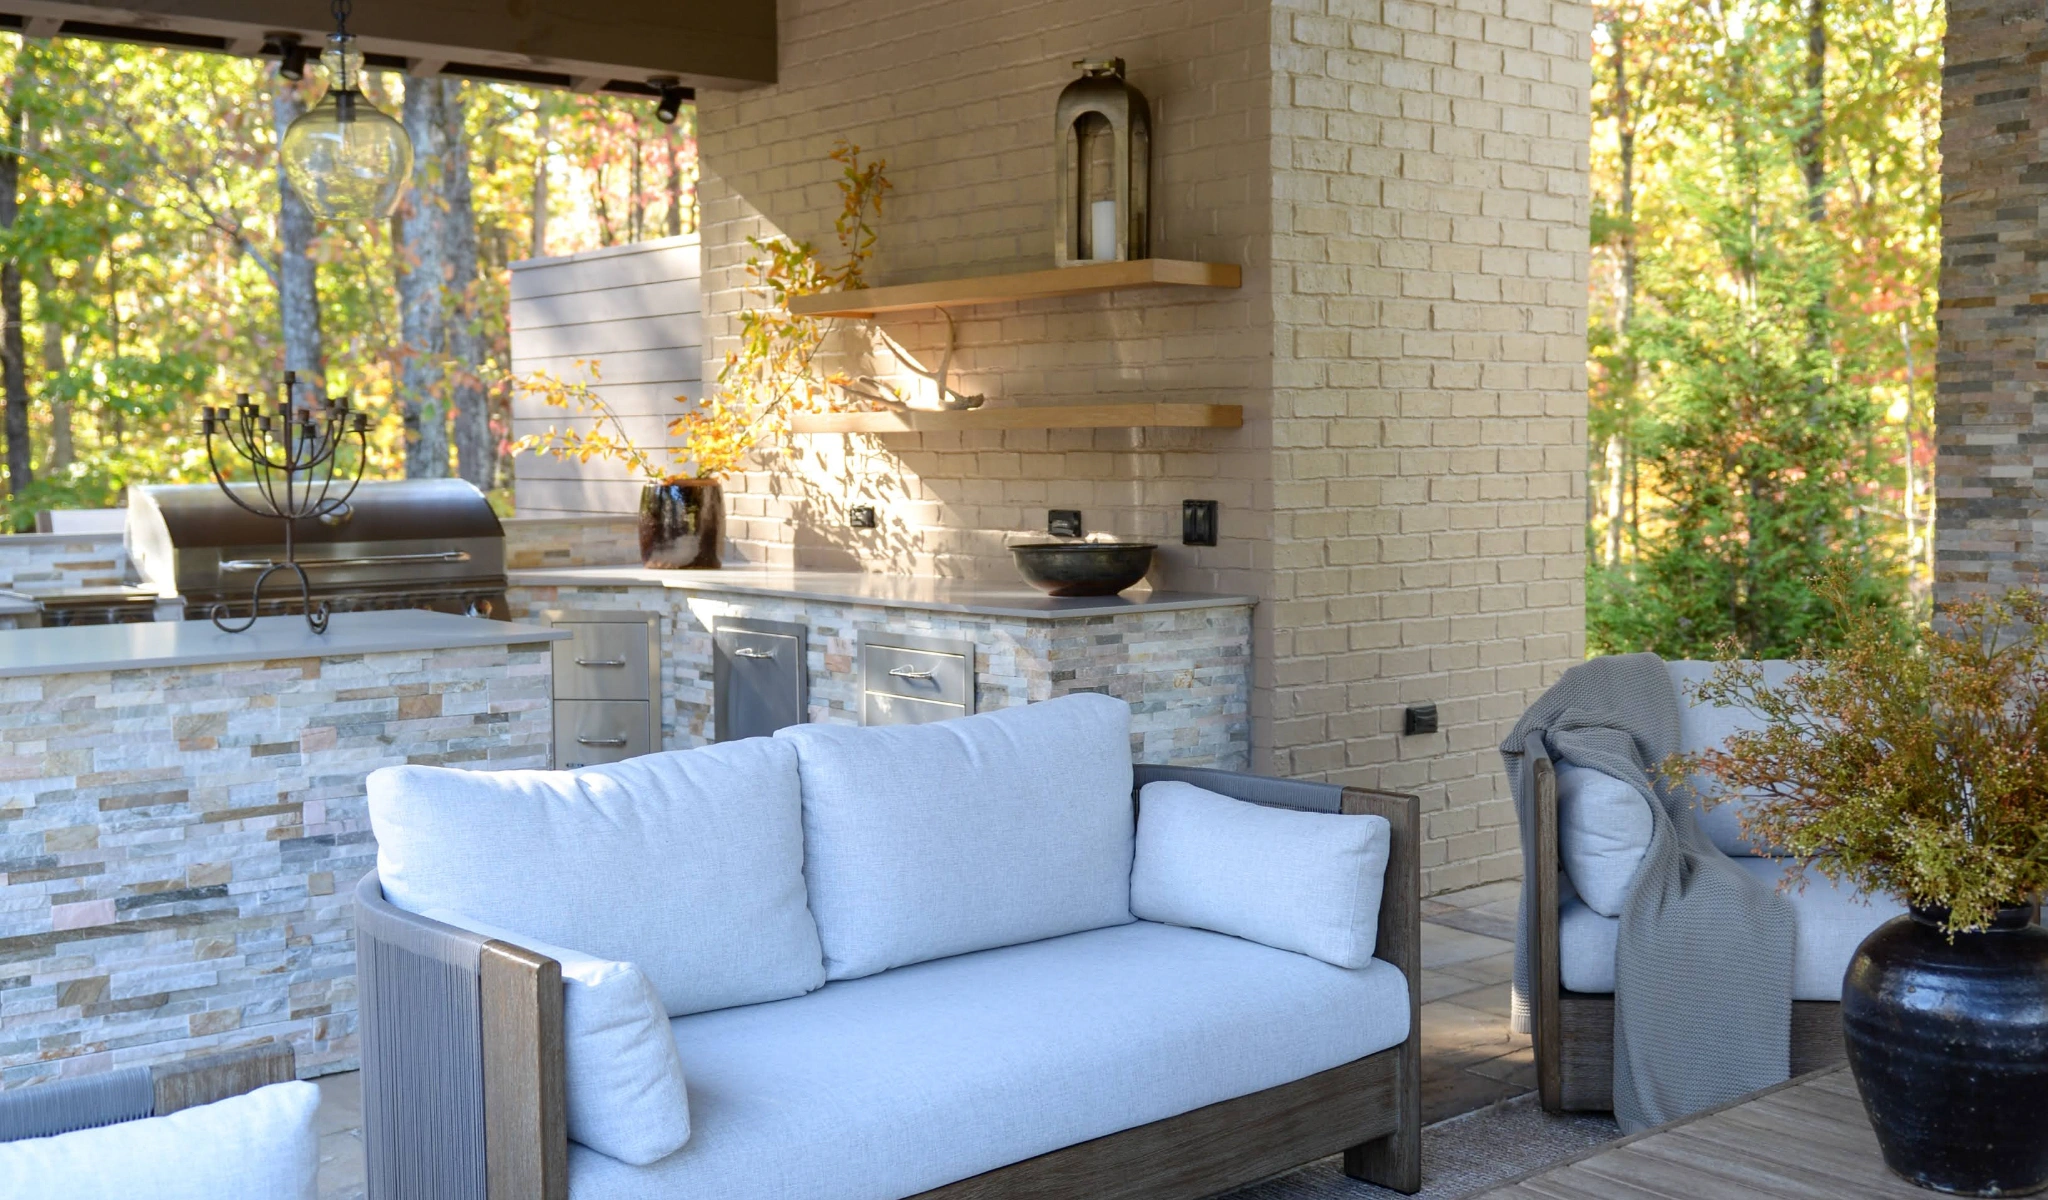 A custom outdoor living area with couches and a grill.